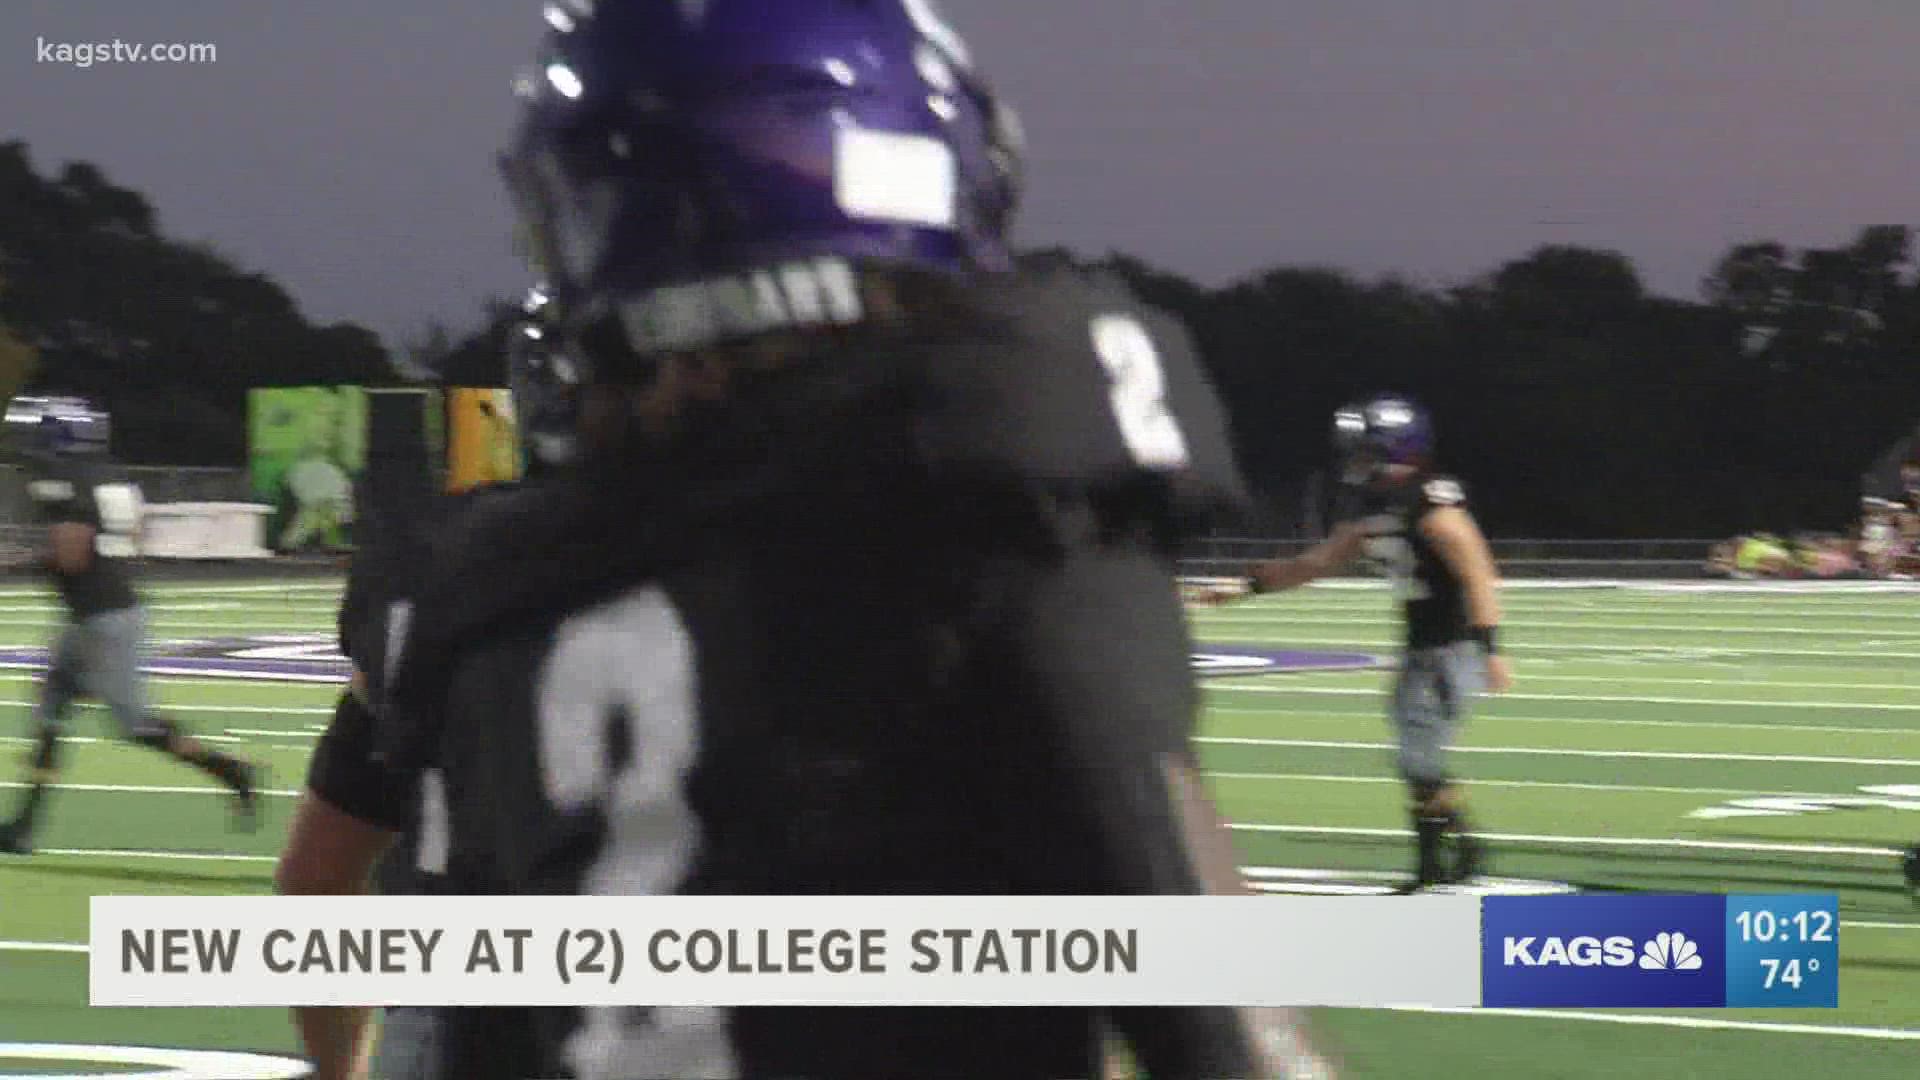 Here are all the highlights during a Week 5 Edition of Friday Night Lights.